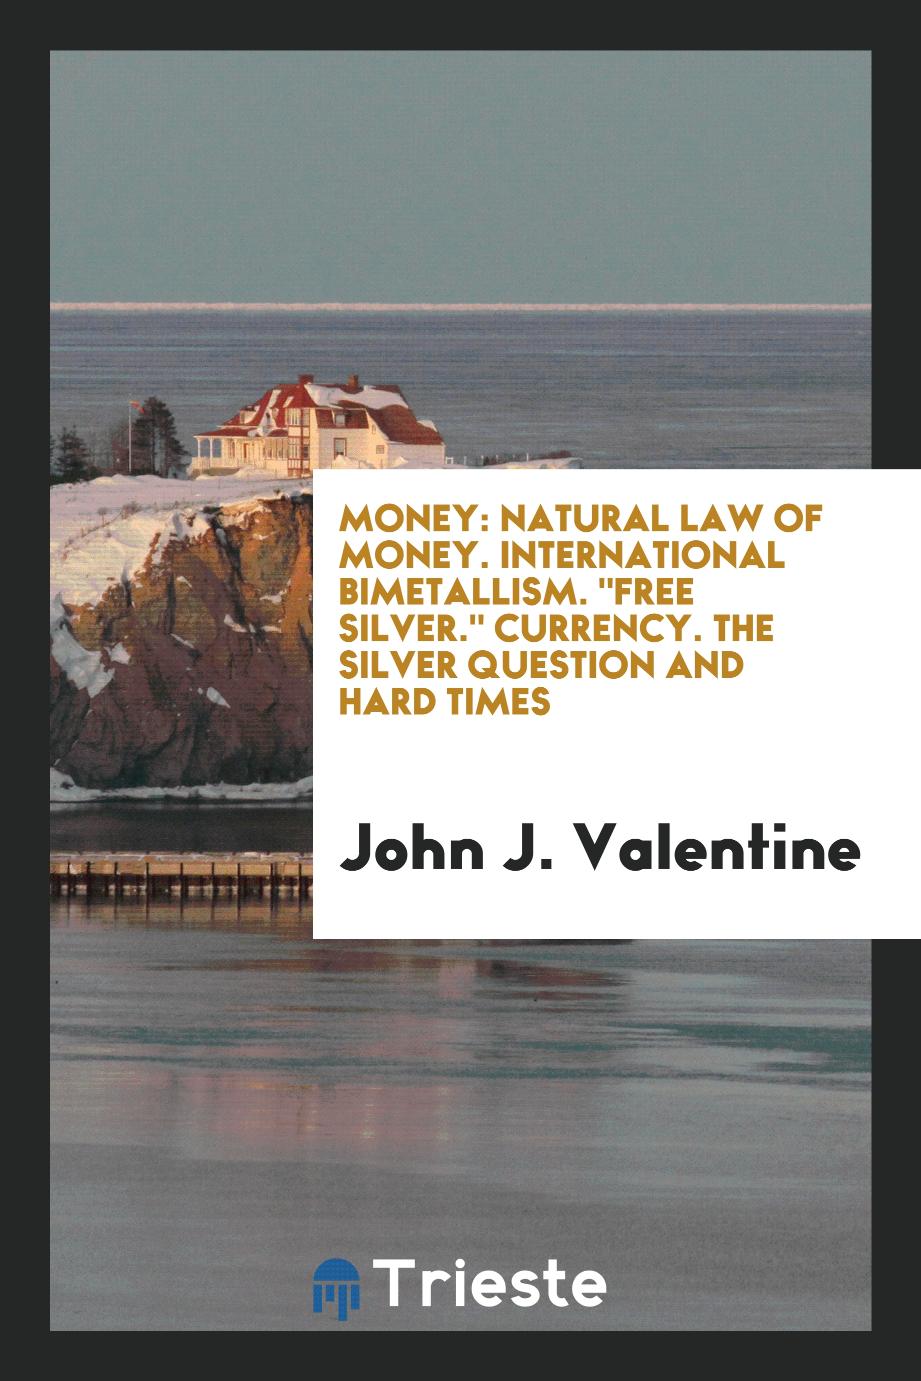 Money: Natural law of money. International bimetallism. "Free silver." Currency. The silver question and hard times